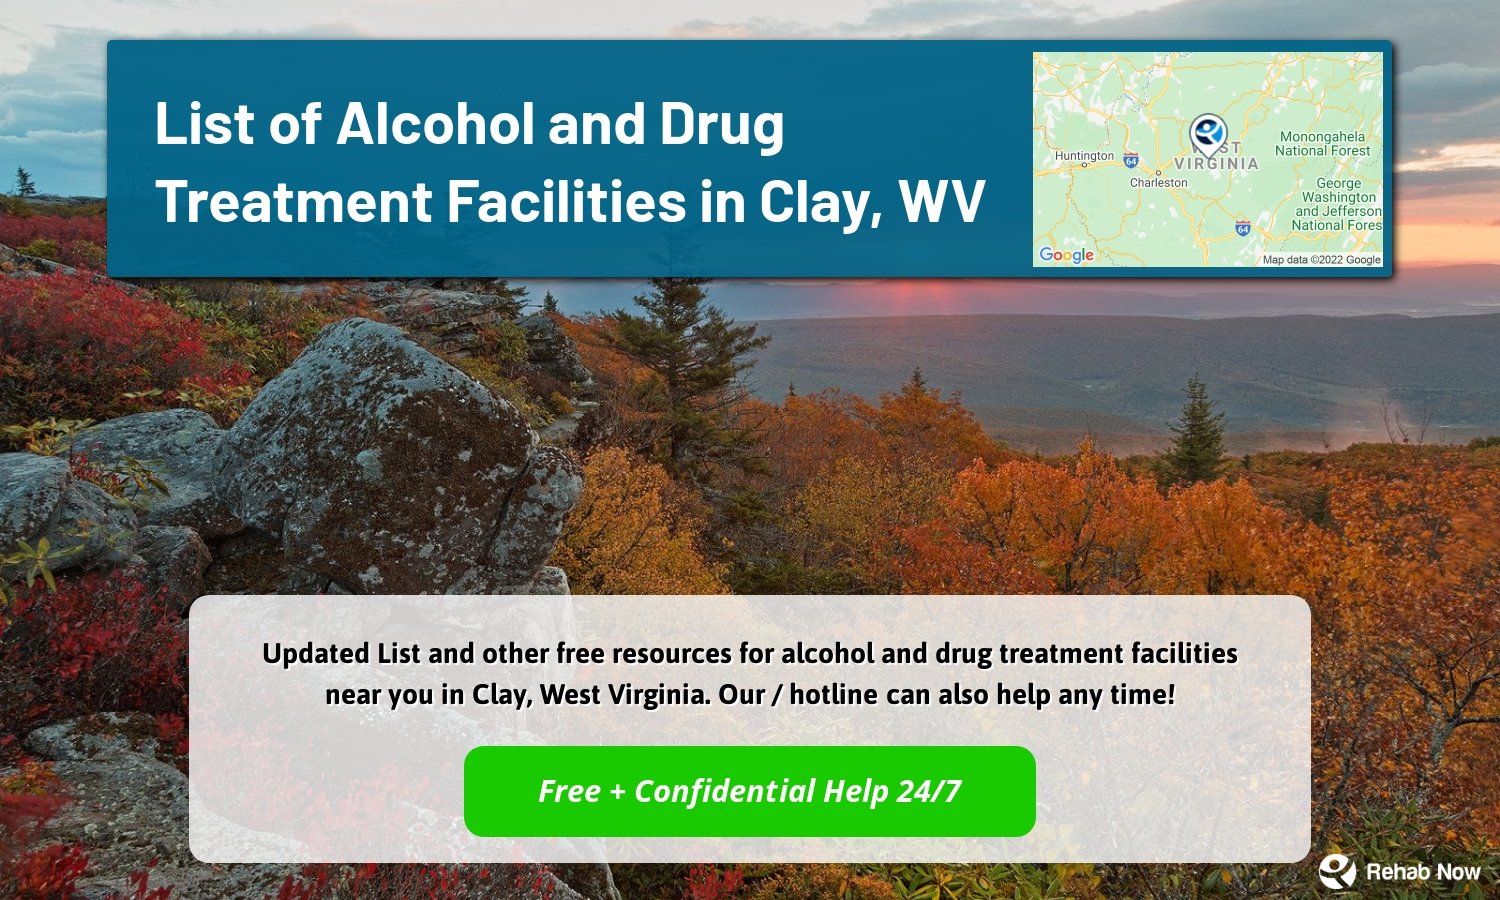  Updated List and other free resources for alcohol and drug treatment facilities near you in Clay, West Virginia. Our / hotline can also help any time!